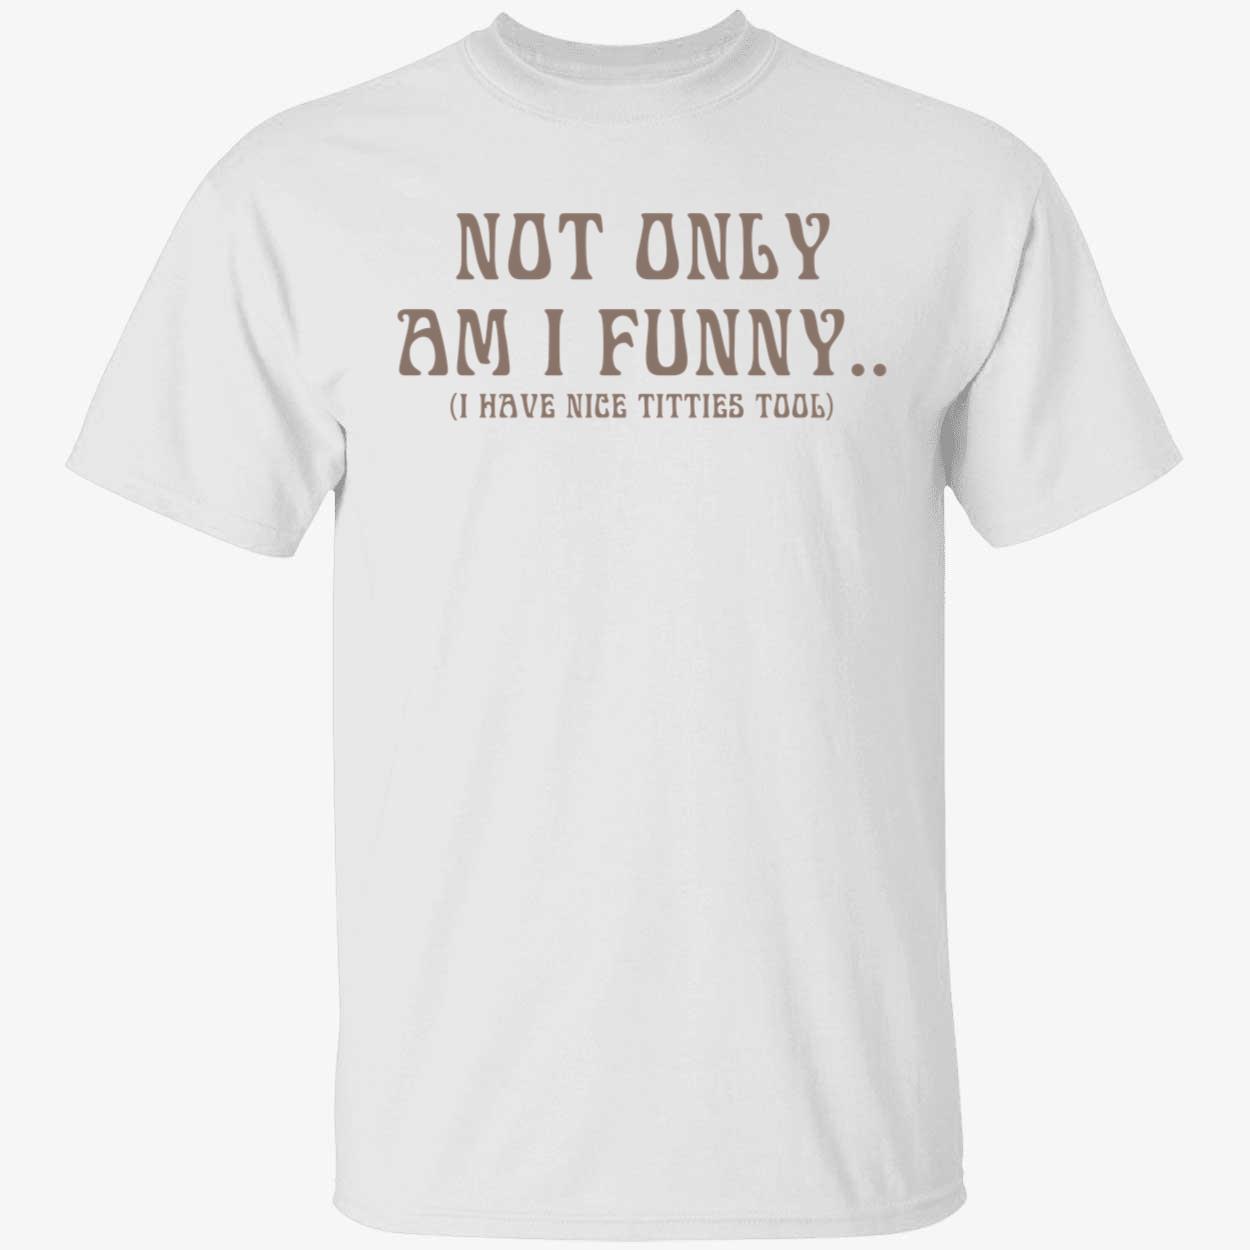 Not Only Am I Funny - I Have Nice Titties Too Shirt